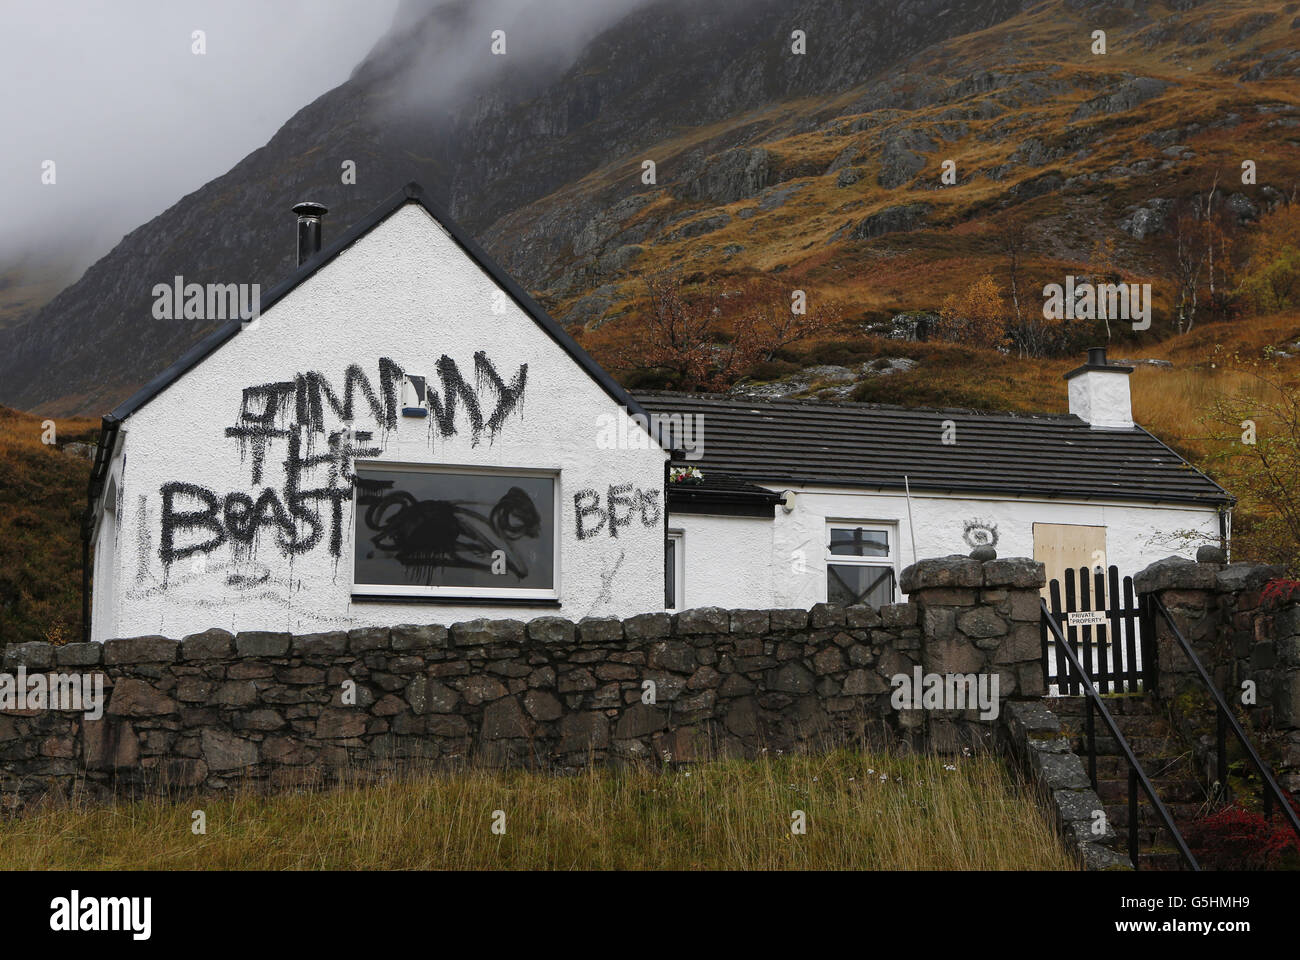 Slogans painted on the cottage owned by Jimmy Savile in Glencoe, Scotland. Stock Photo